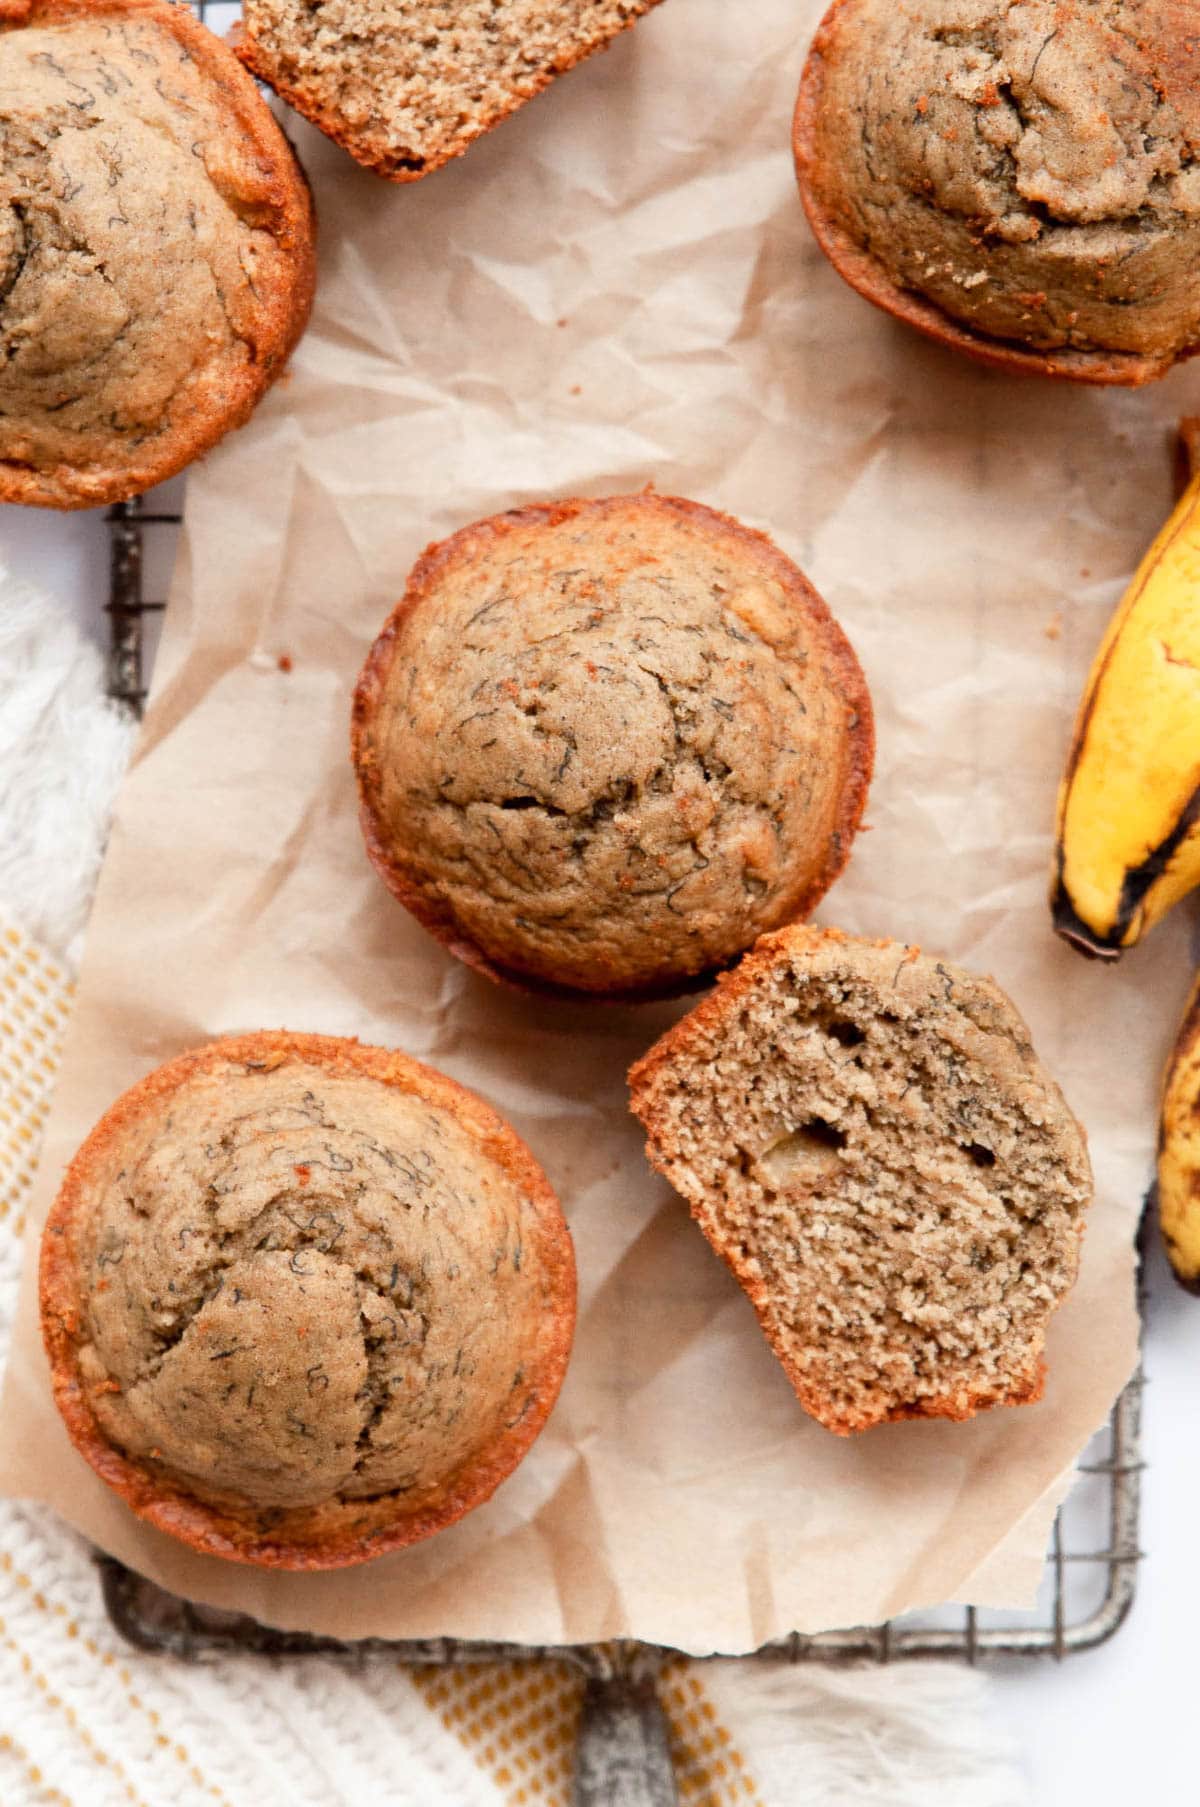 Oat flour banana muffins on parchment paper and the one muffin cut and showing texture.